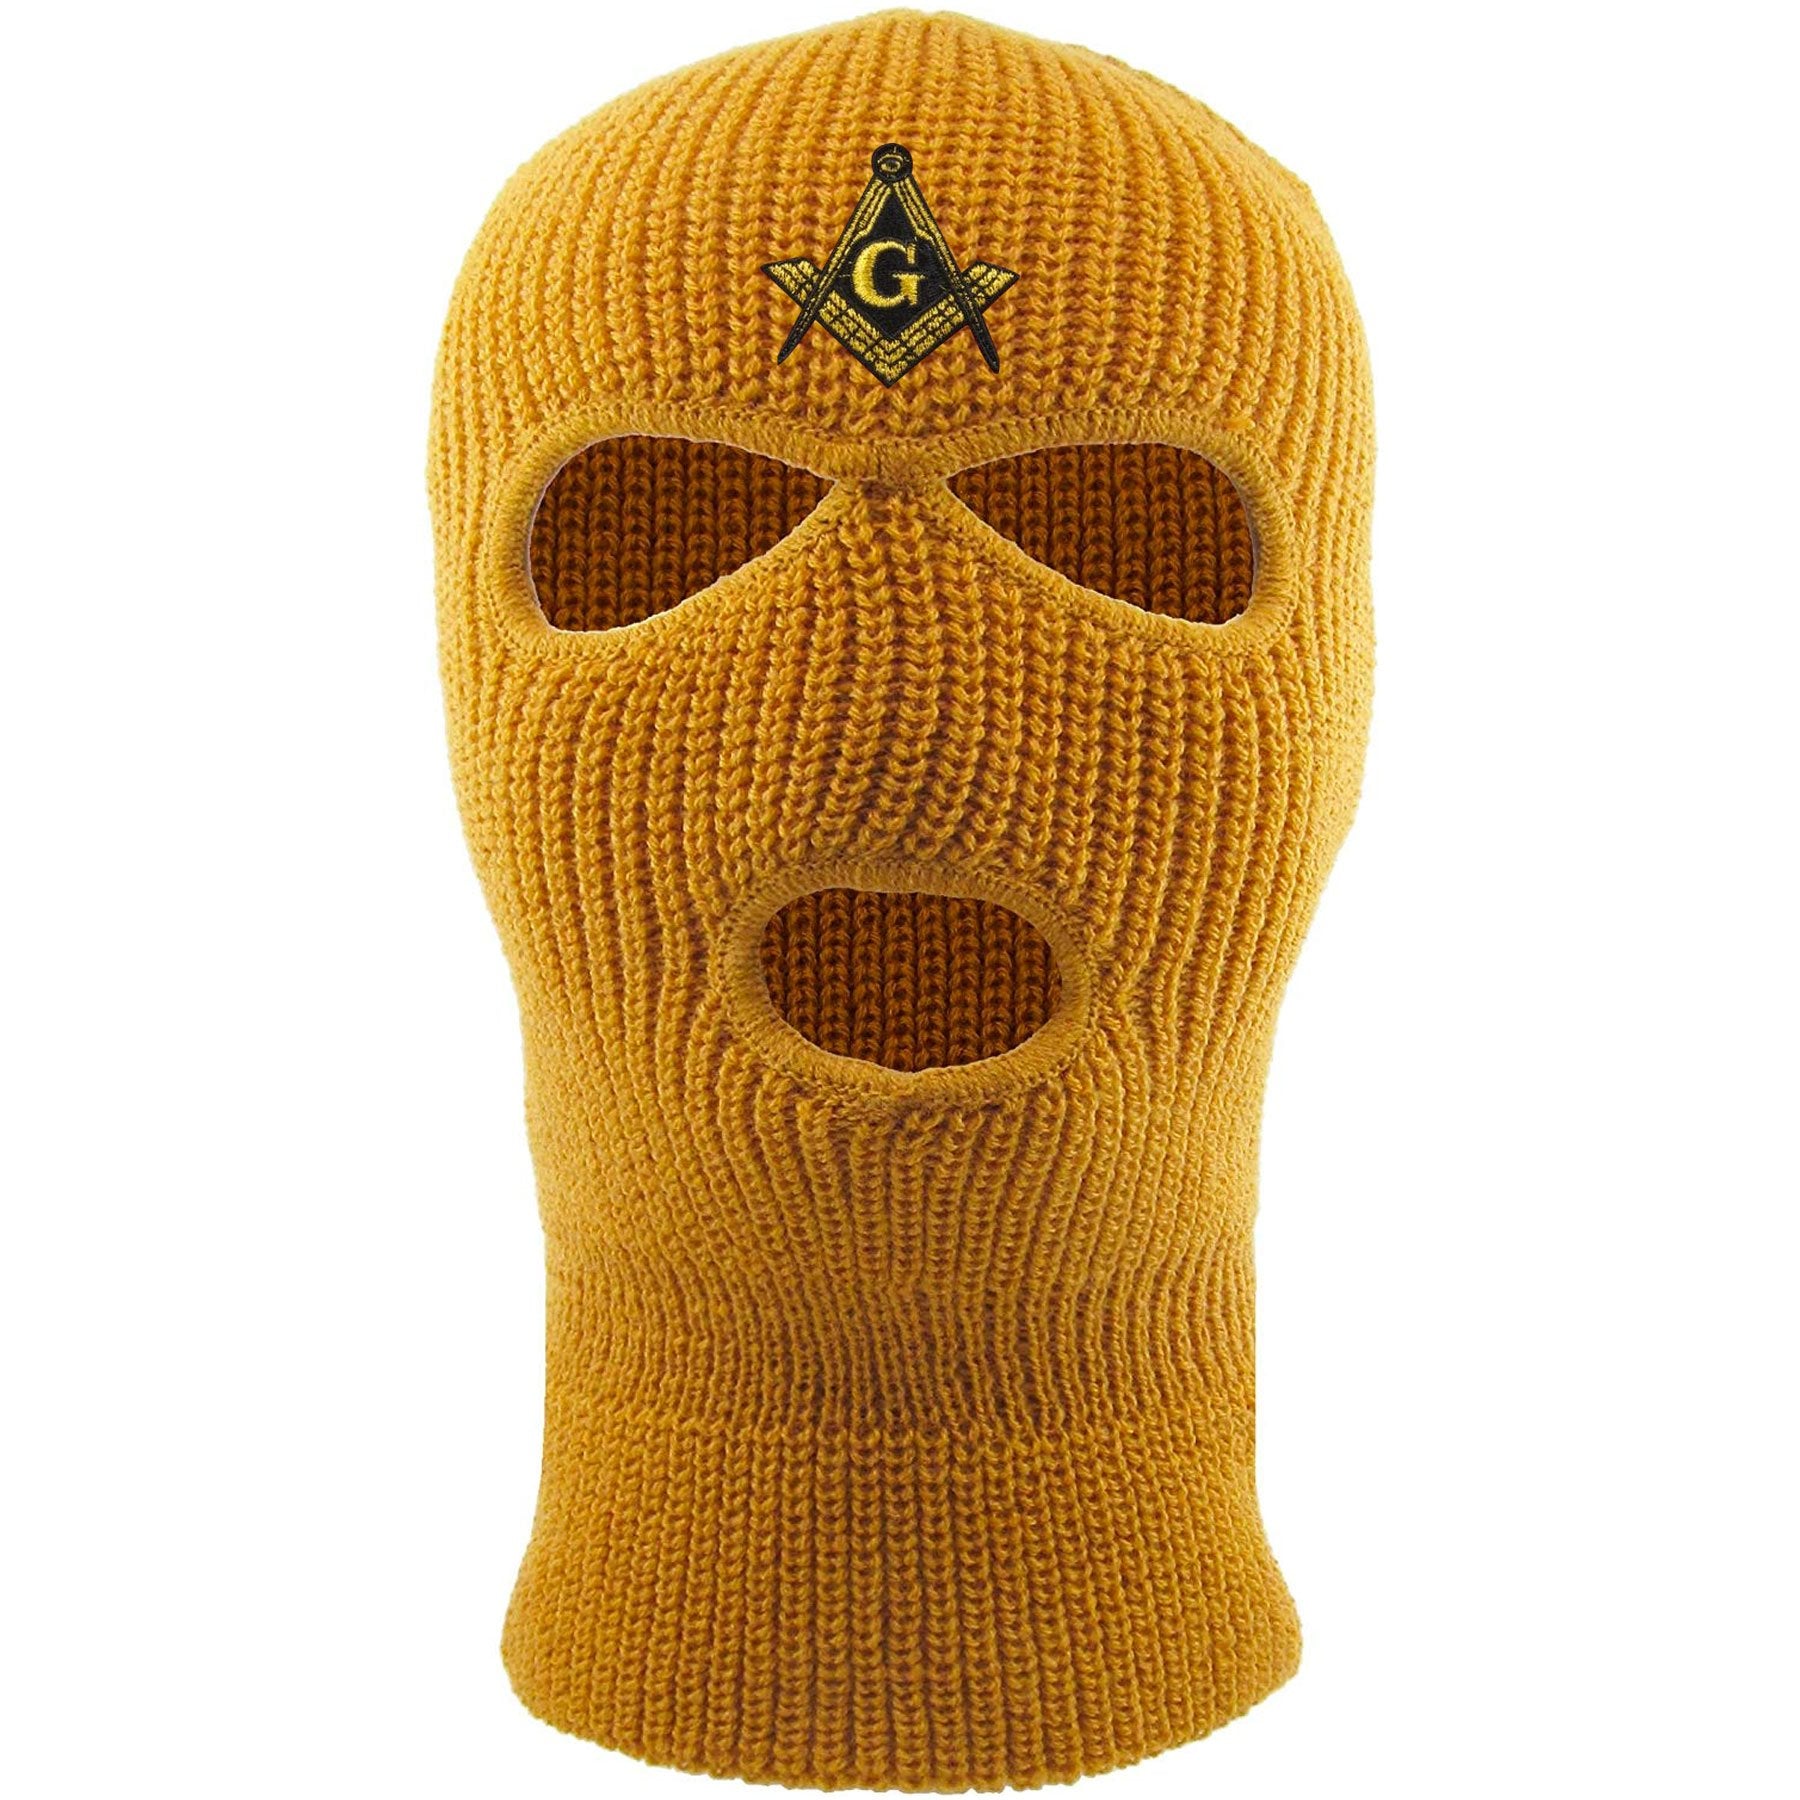 Embroidered on the front of the timberland masonic ski mask is the free mason square mason logo embroidered in black and gold